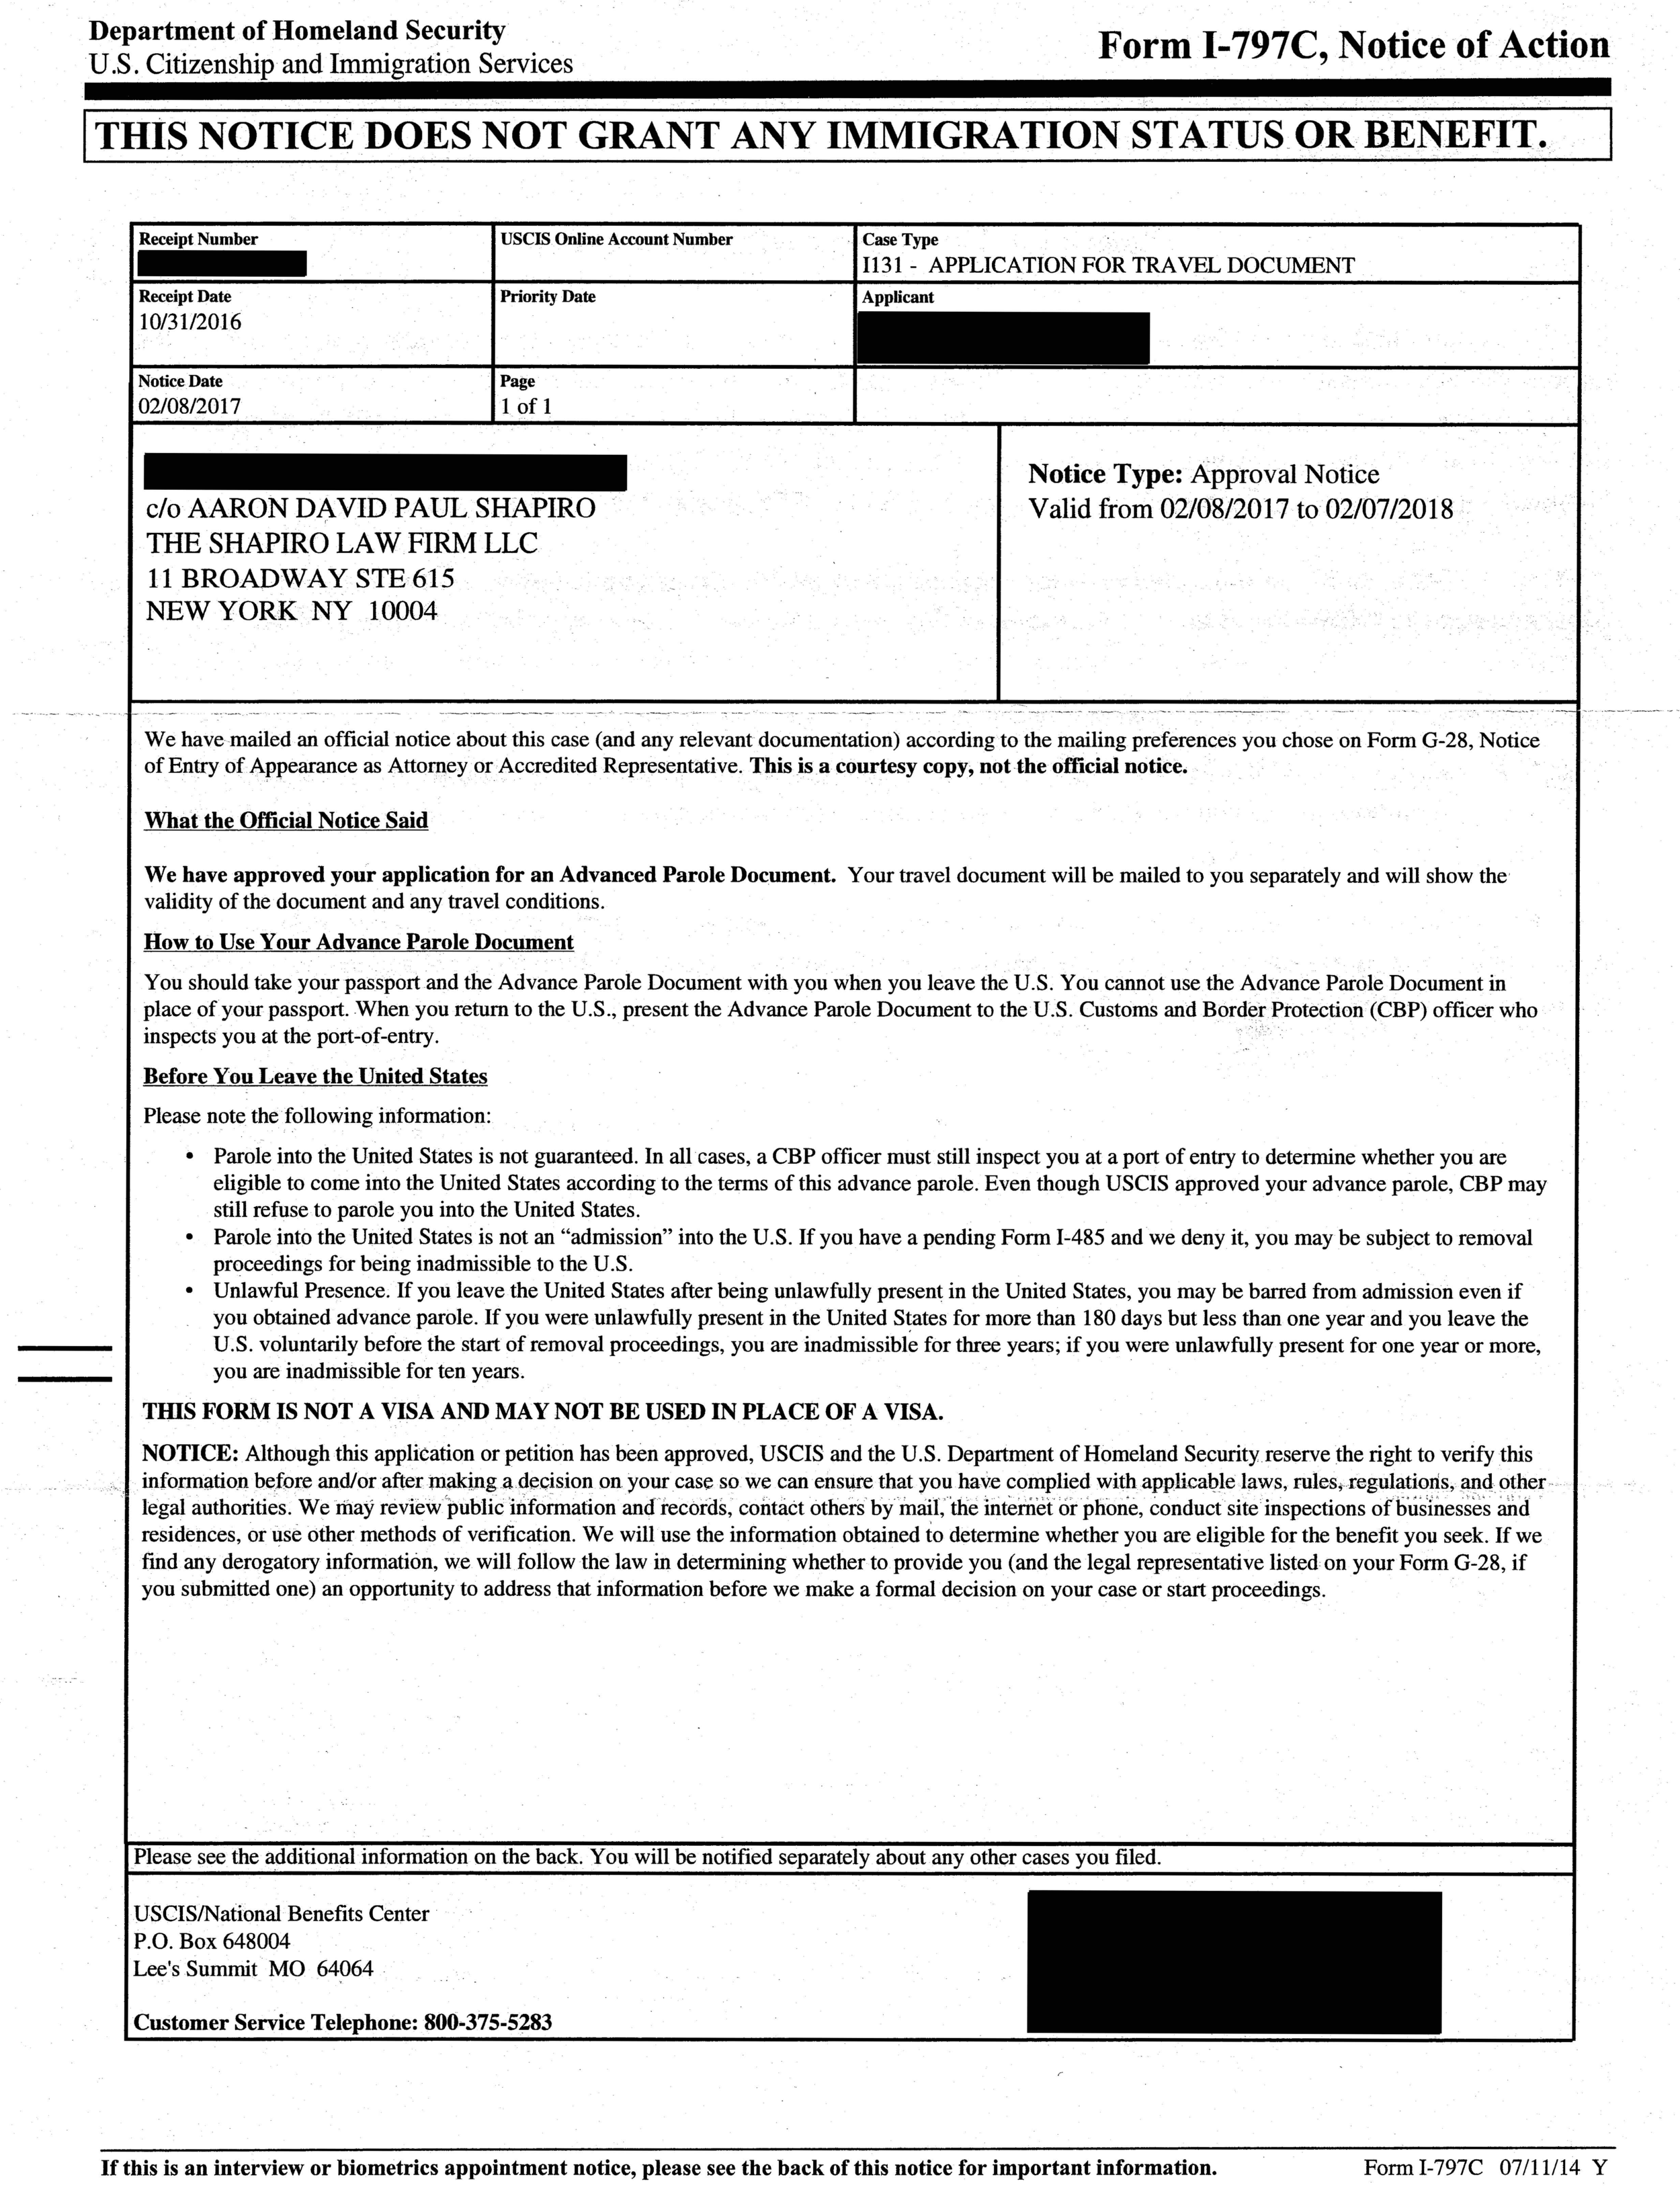 Form I-797C, Notice of Action - I-131 Approval Notice